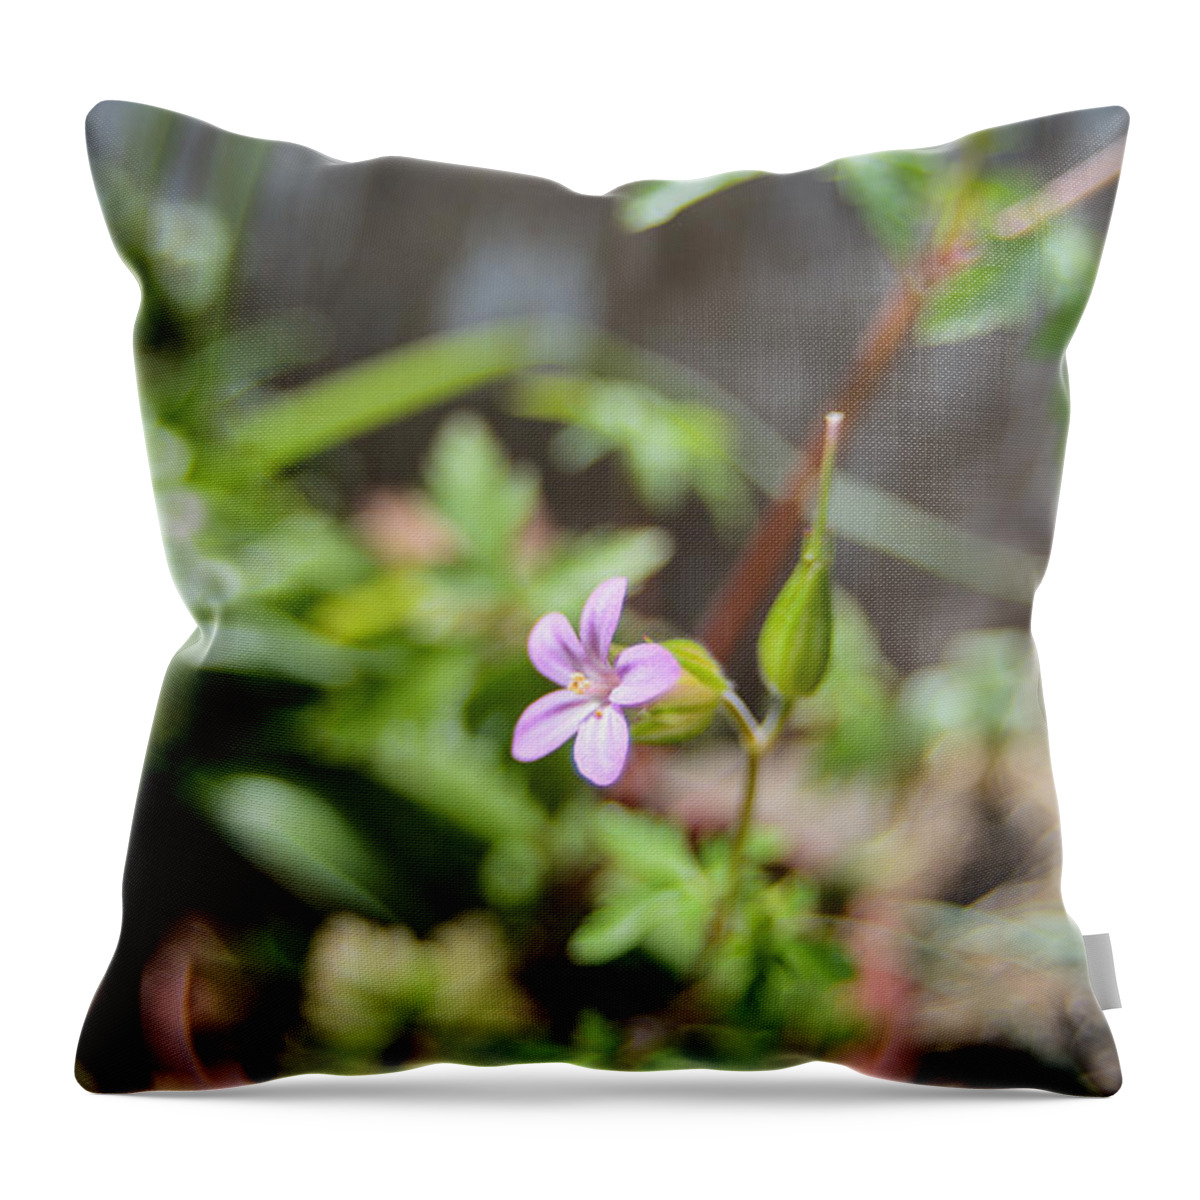 Agricultural Throw Pillow featuring the photograph Floret by Michael Goyberg